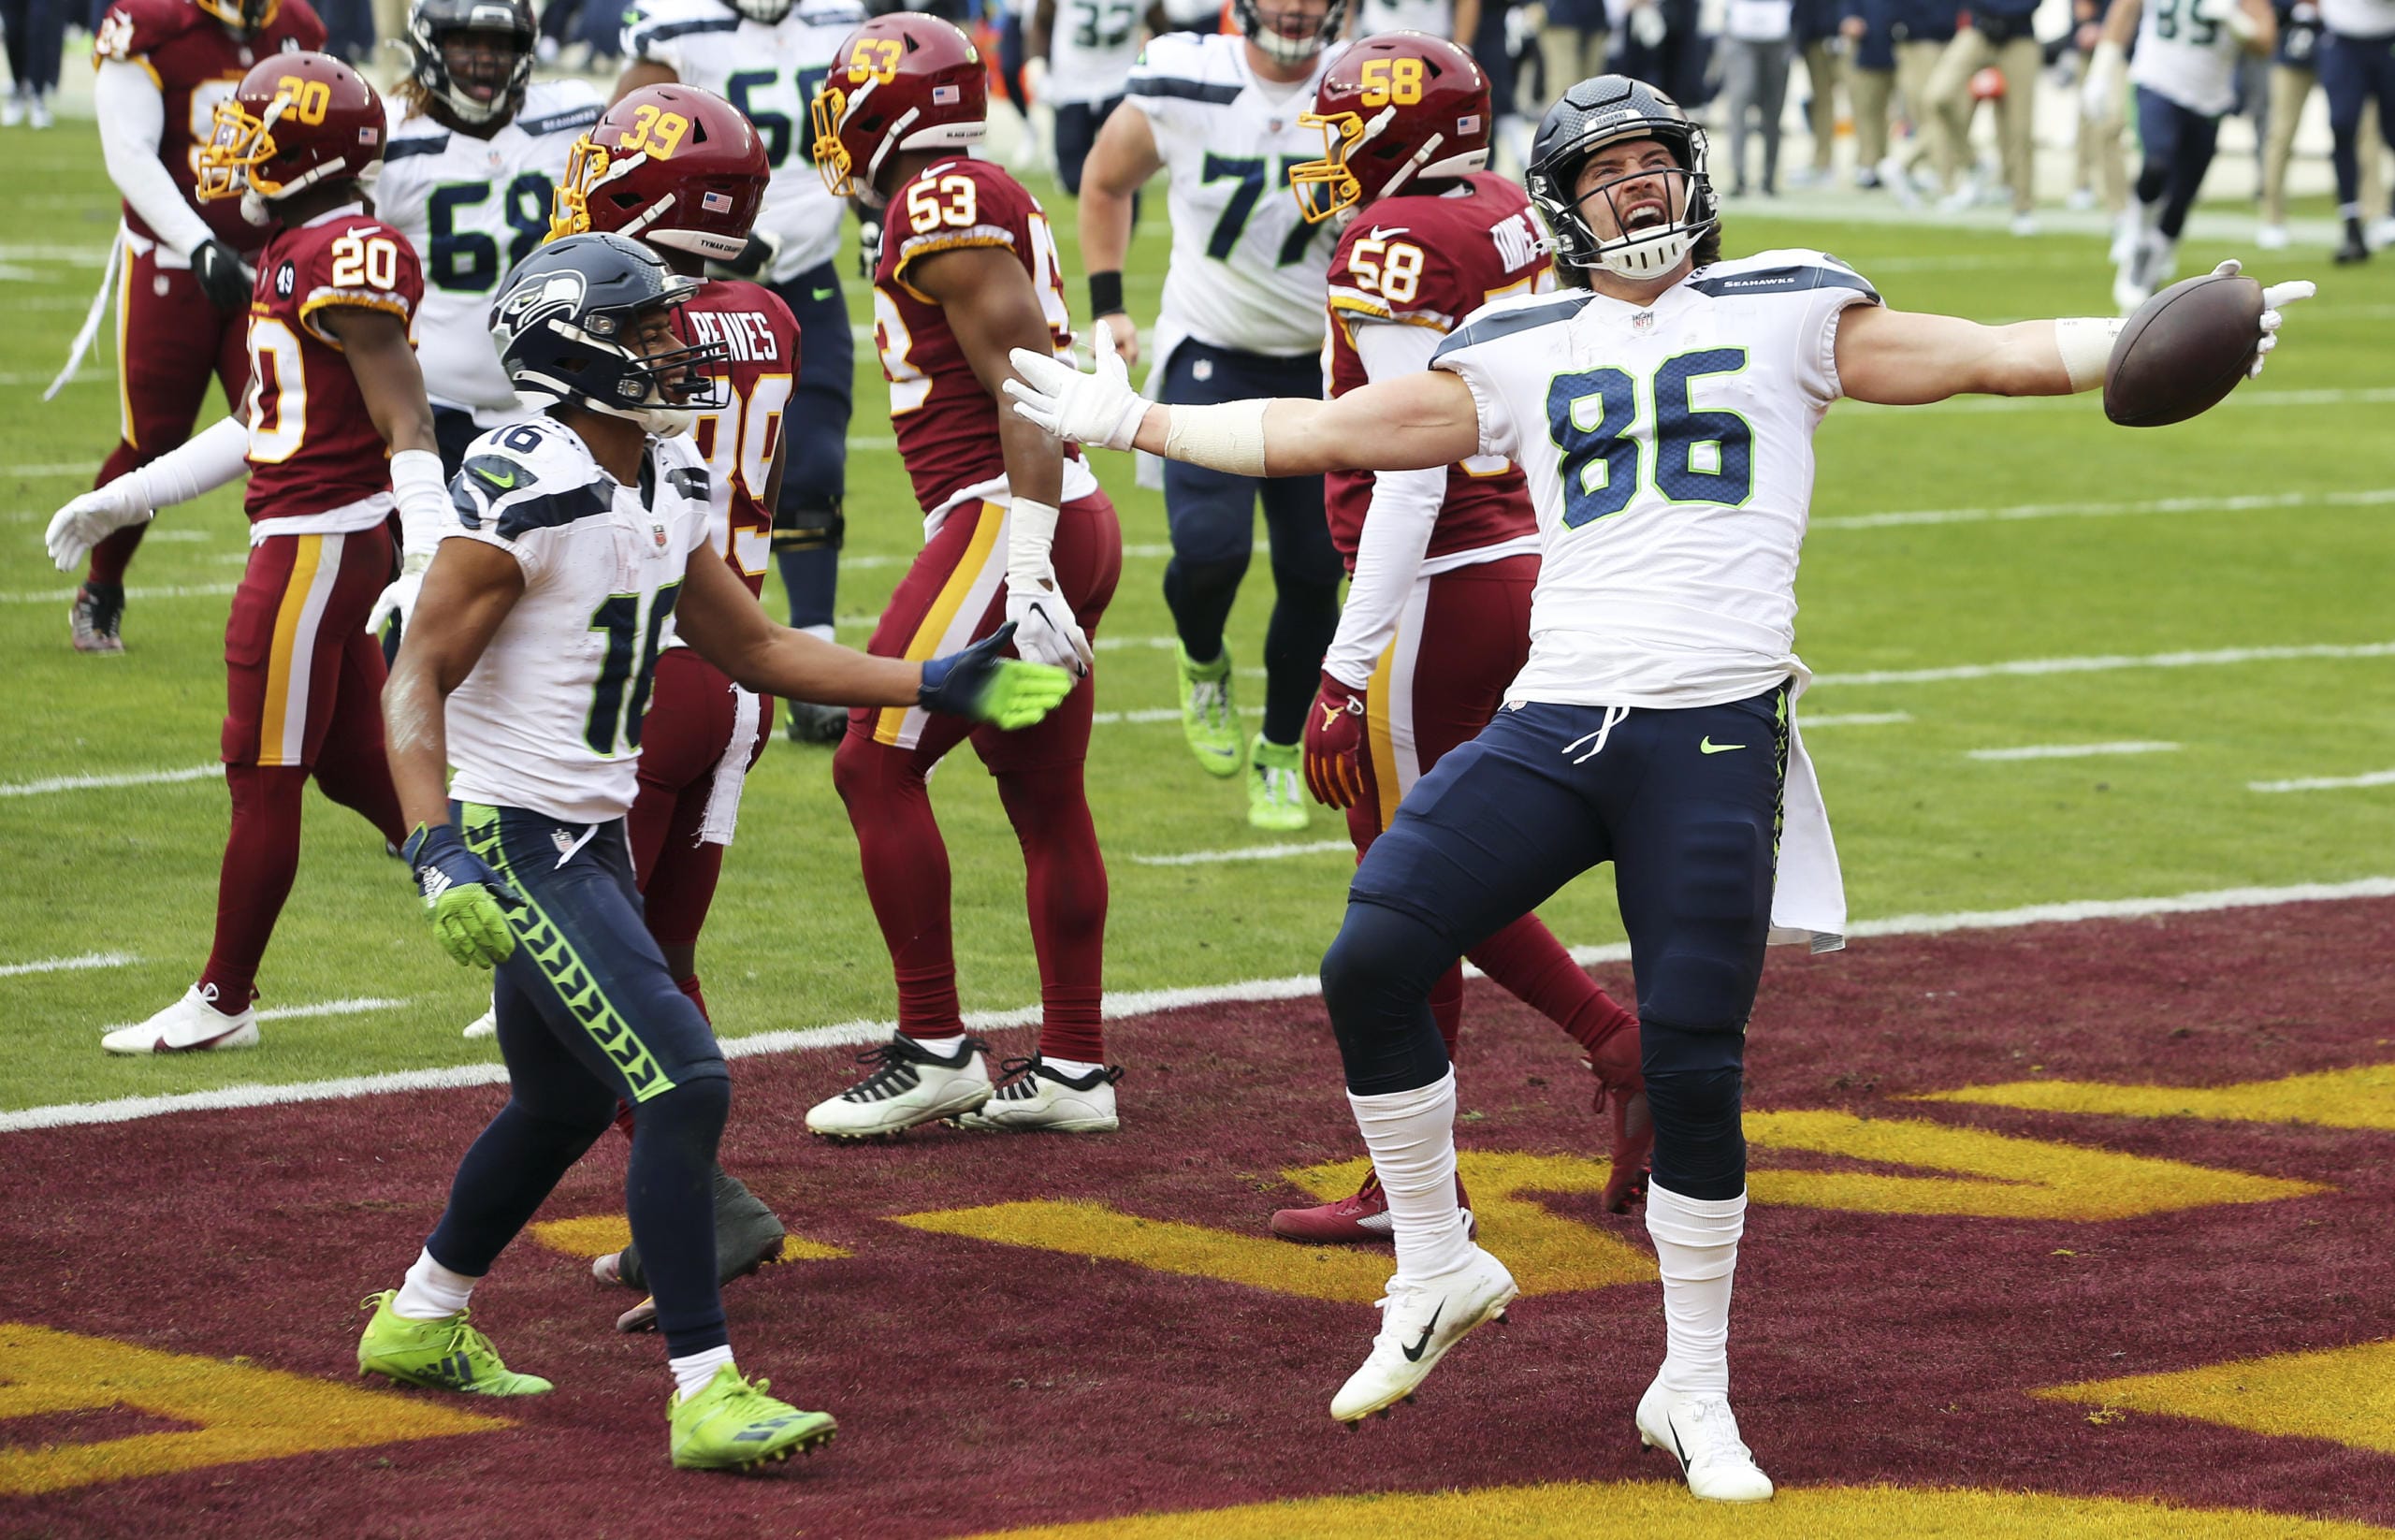 Seattle Seahawks tight end Jacob Hollister (86) celebrates after scoring a touchdown during an NFL football game against the Washington Football Team, Sunday, Dec. 20, 2020 in Landover, Md.